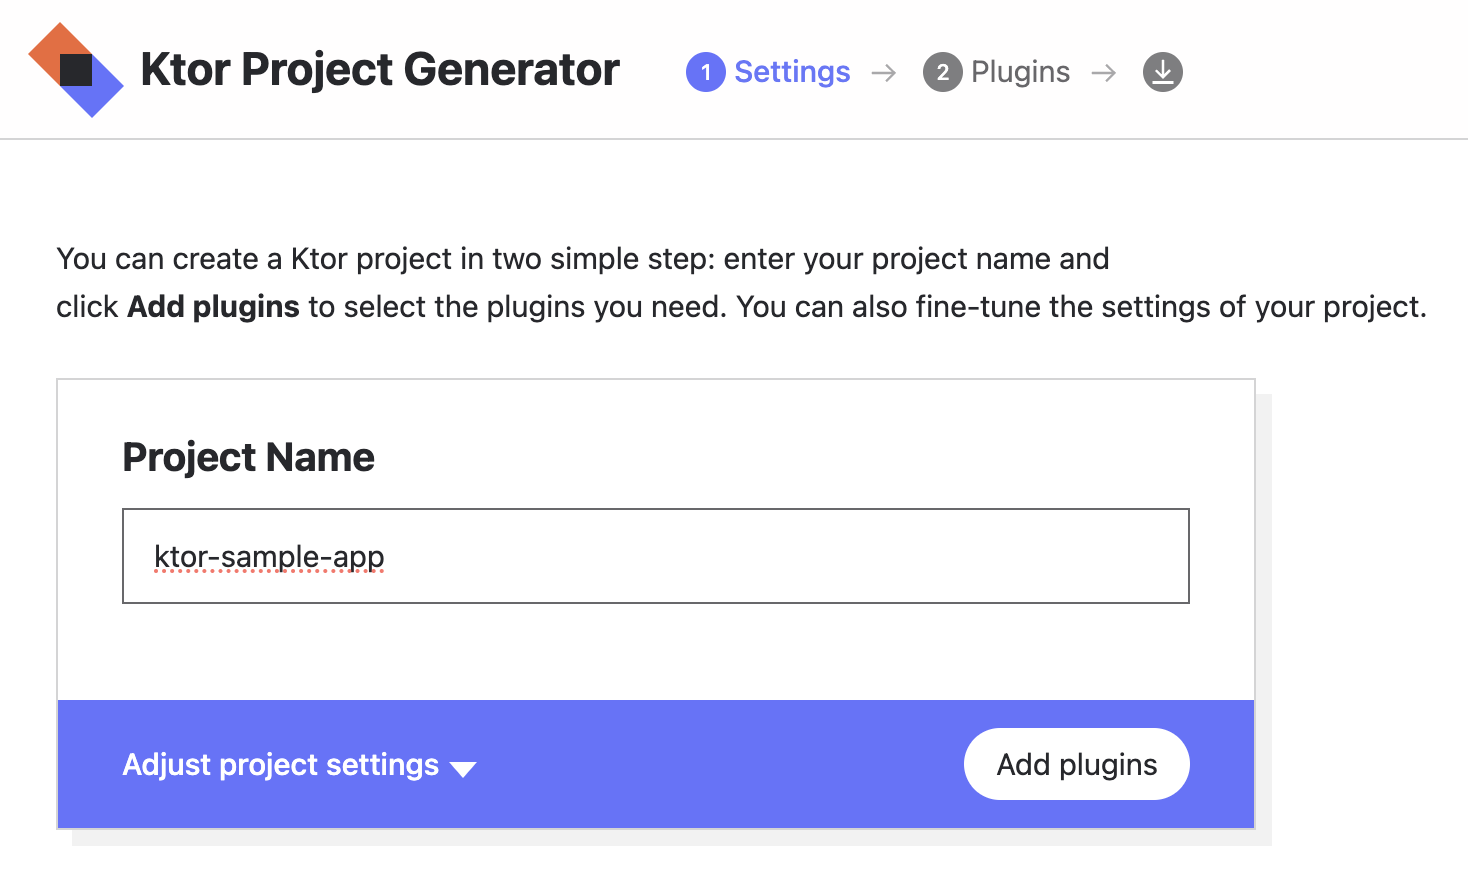 Ktor Project Generator with Project Name ktor-sample-app